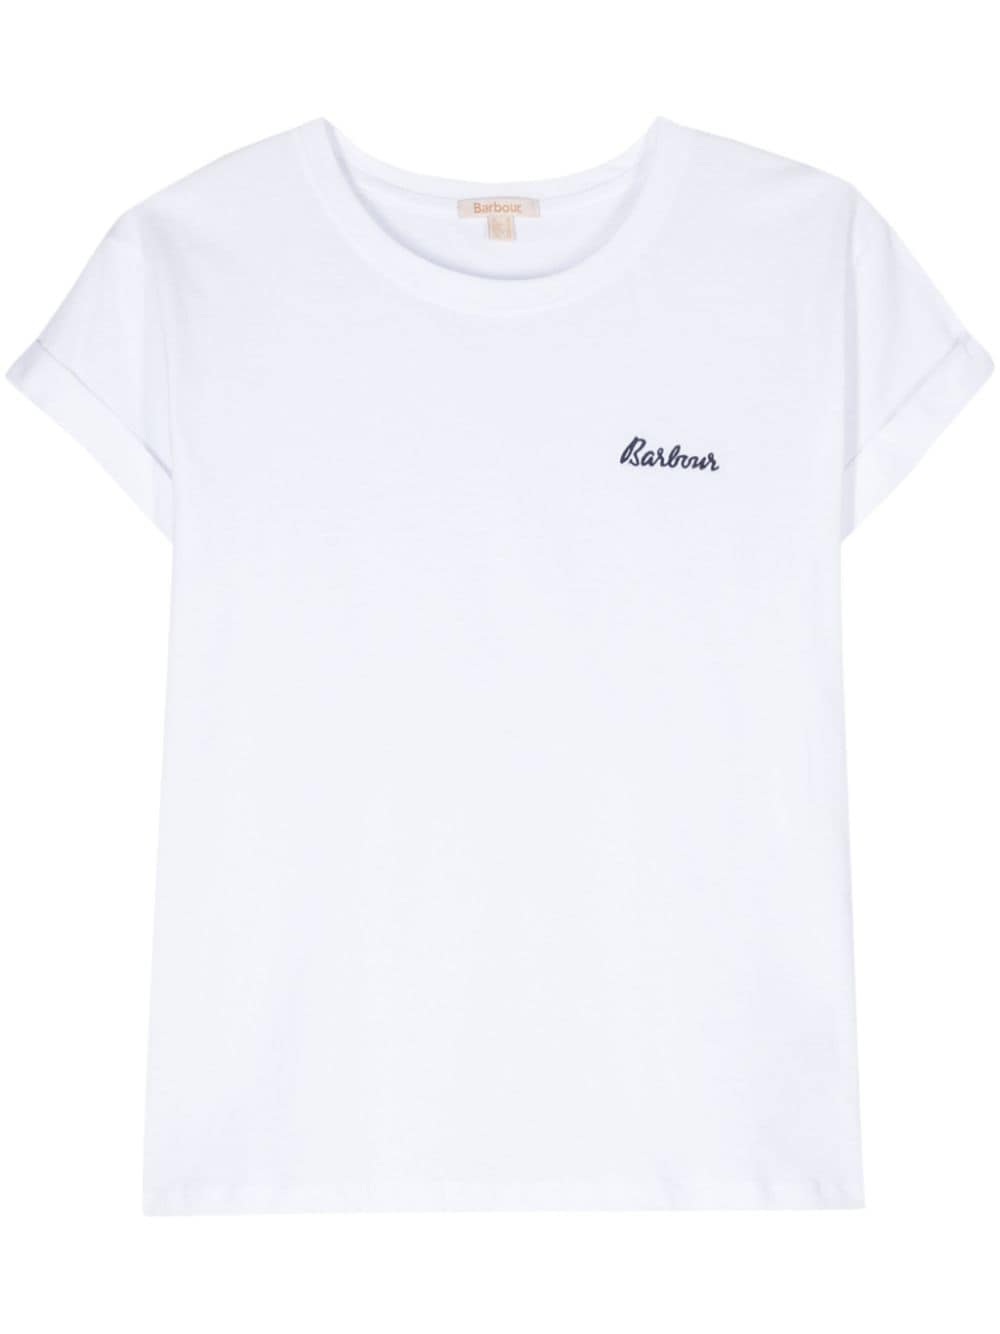 Barbour Kenmore logo-embroidered T-Shirt - White von Barbour